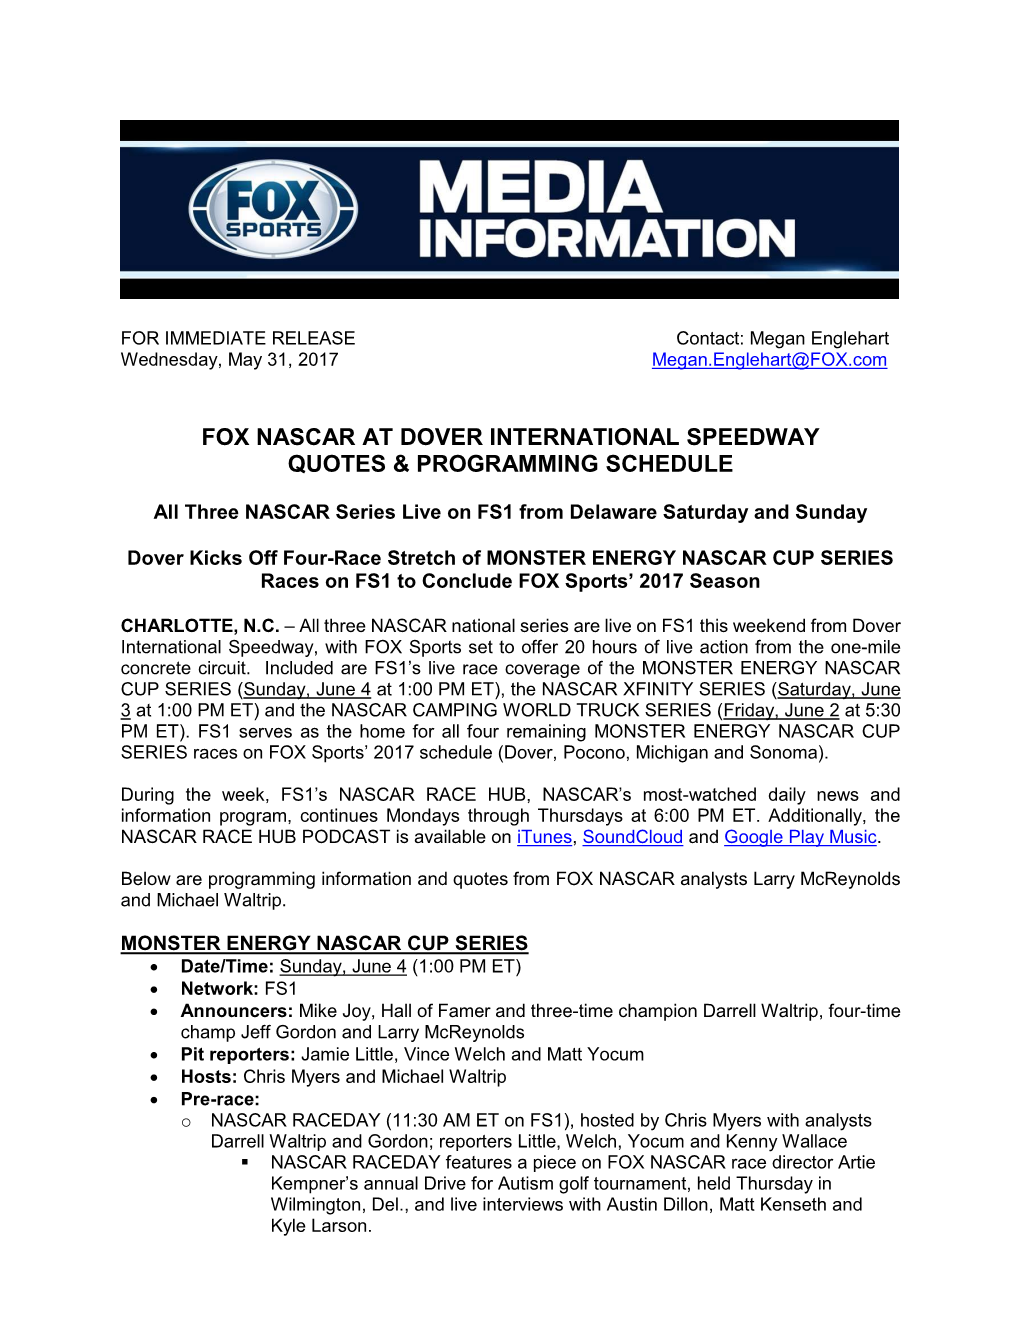 Fox Nascar at Dover International Speedway Quotes & Programming Schedule